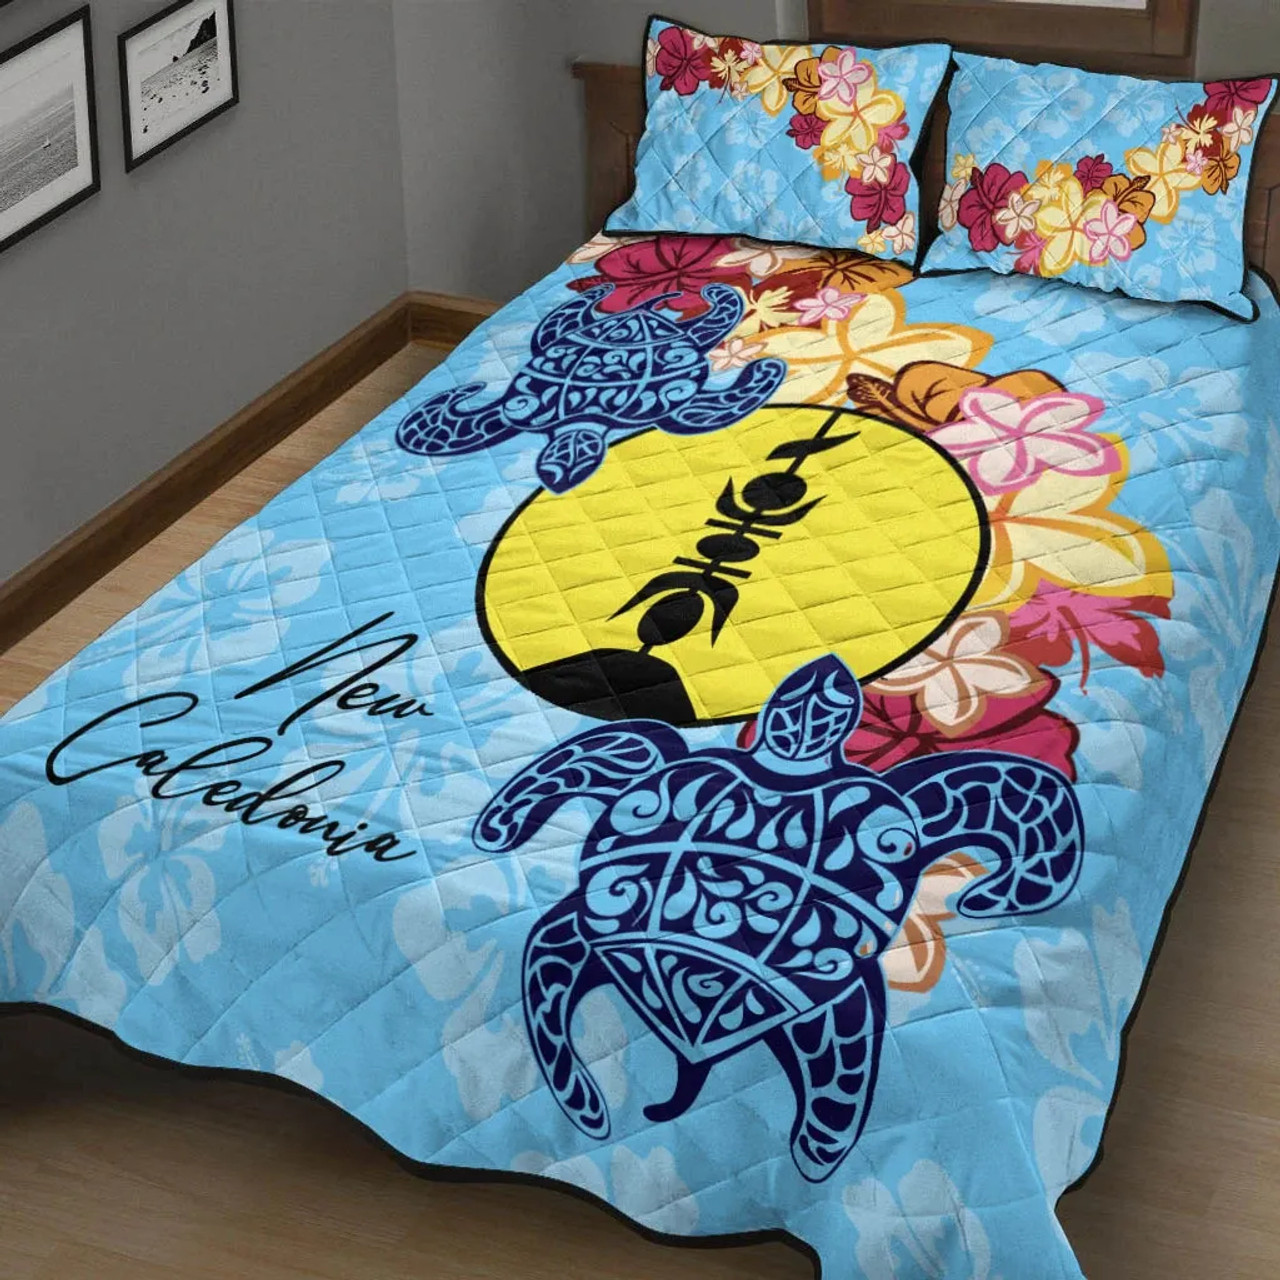 New Caledonia Quilt Bed Set - Tropical Style 3